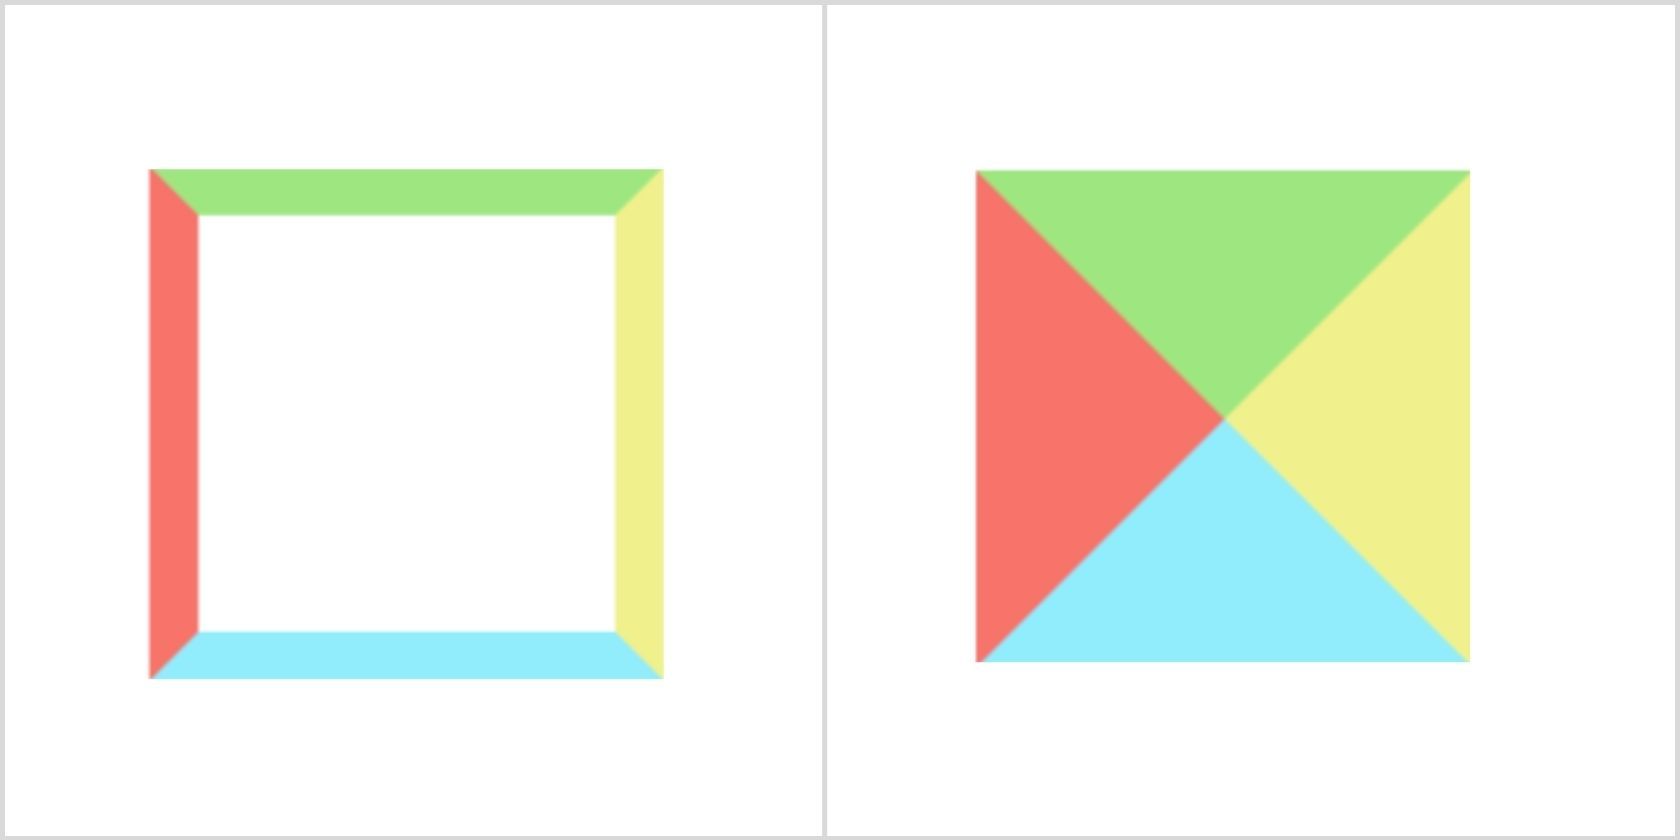 Drawing triangle using border property in CSS